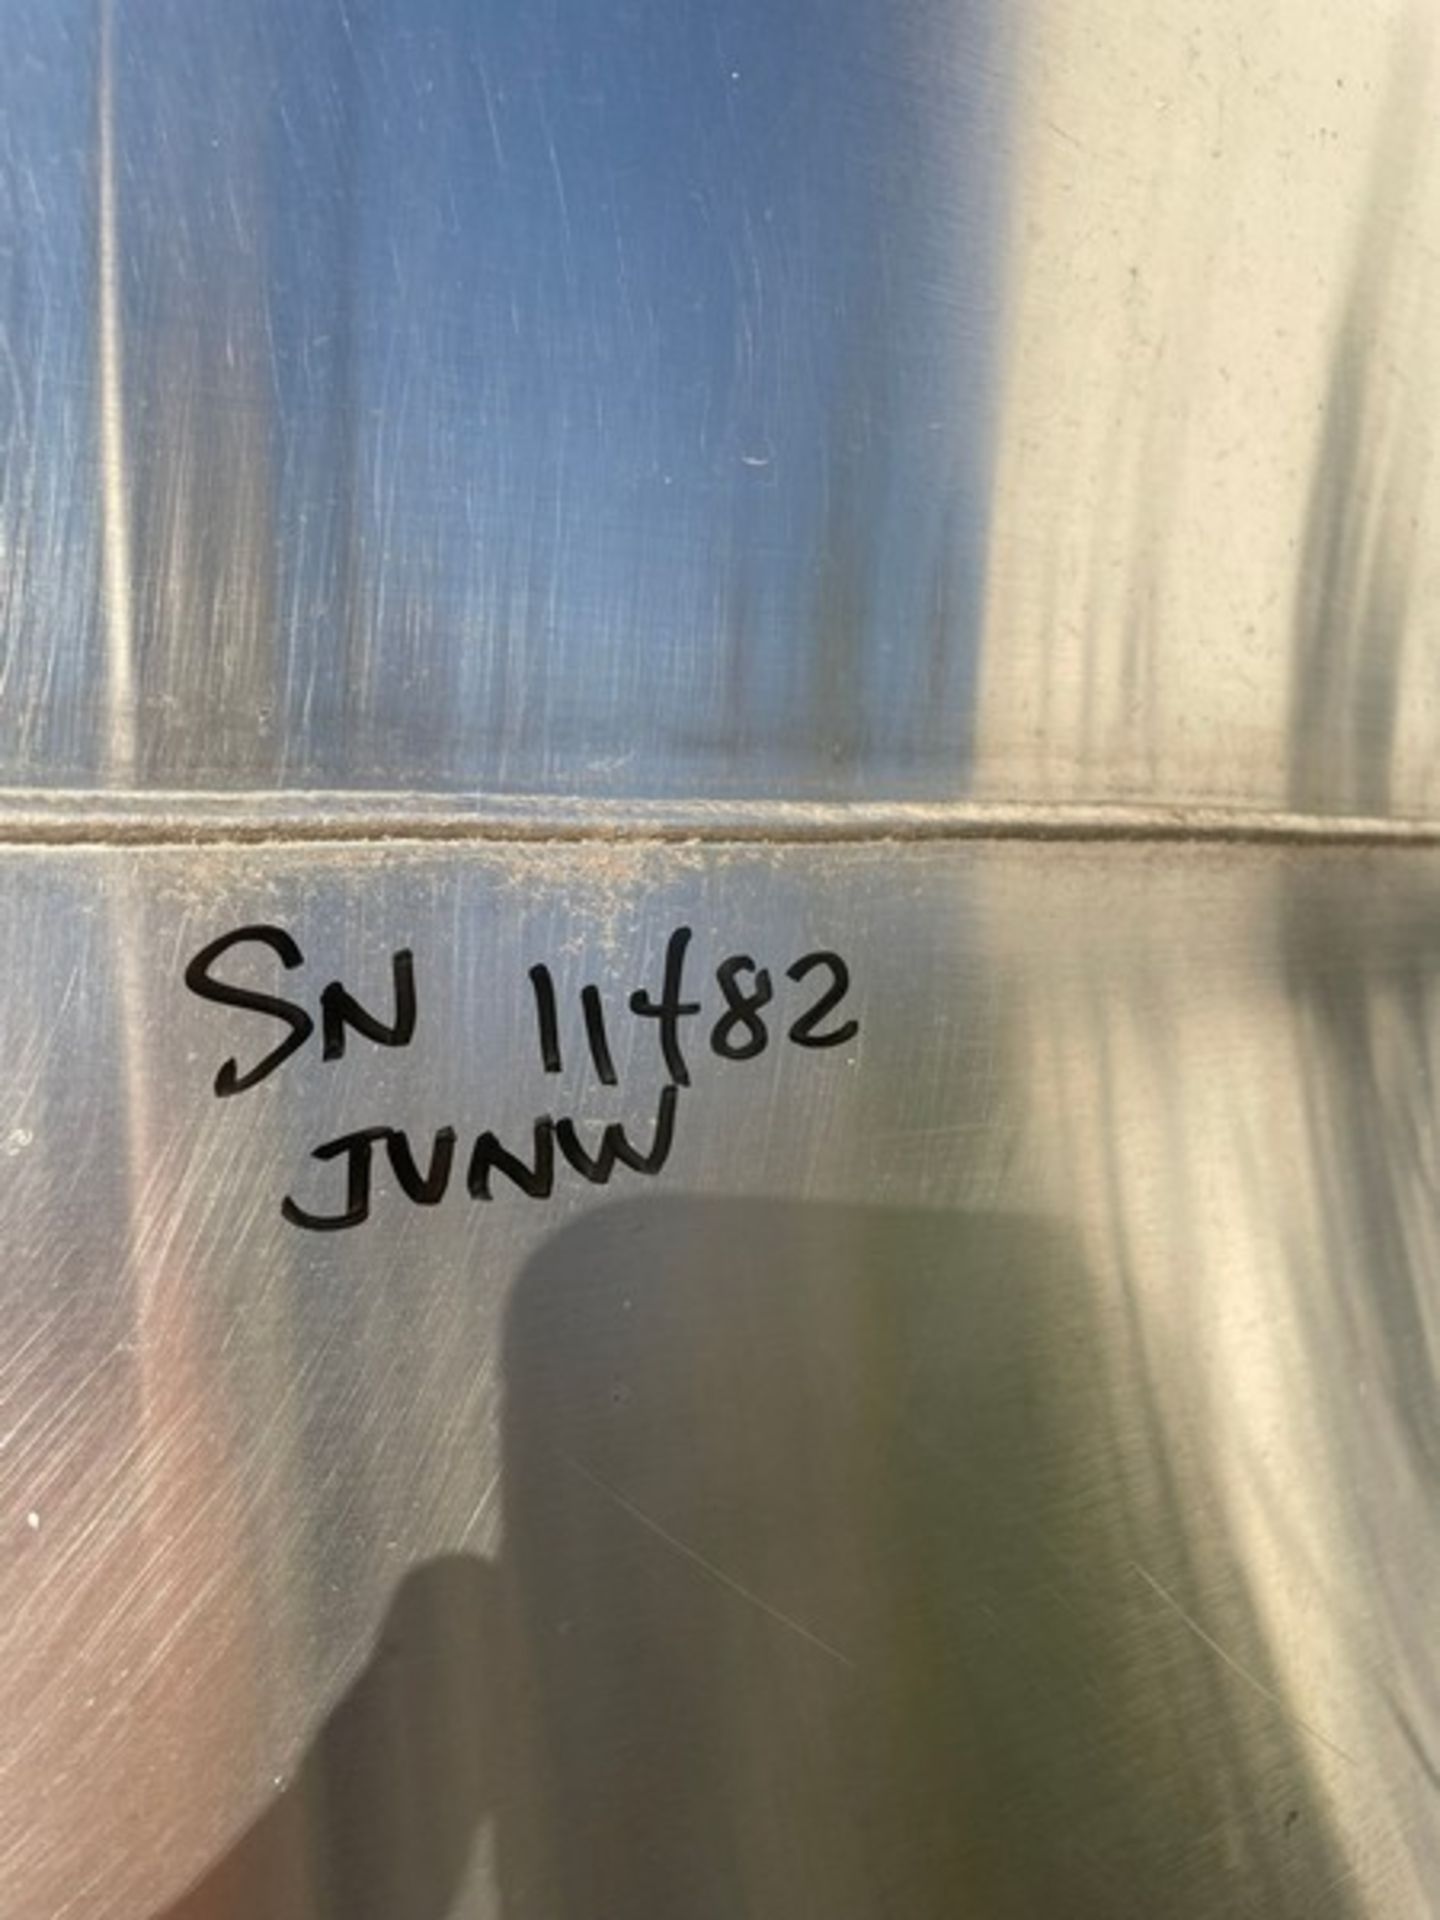 Small JVNW Stainless Tank – Lot #232 (LOCATED IN FREDERICK, MD) - Image 5 of 5